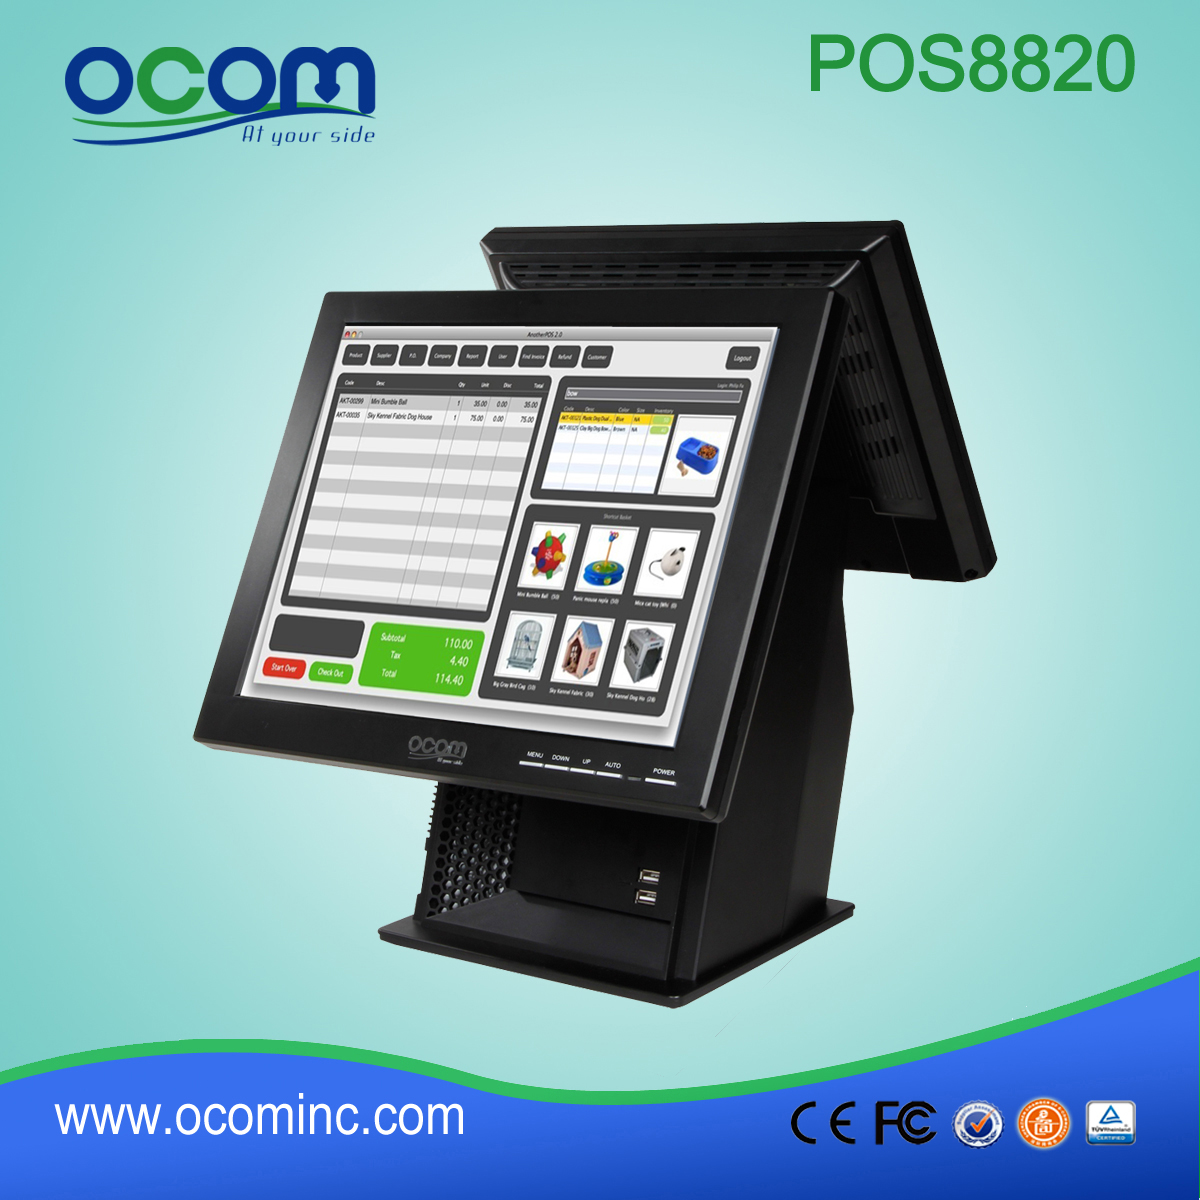 POS8820: 15-Zoll-All-In-One-Touch-Screen-Kassenautomat